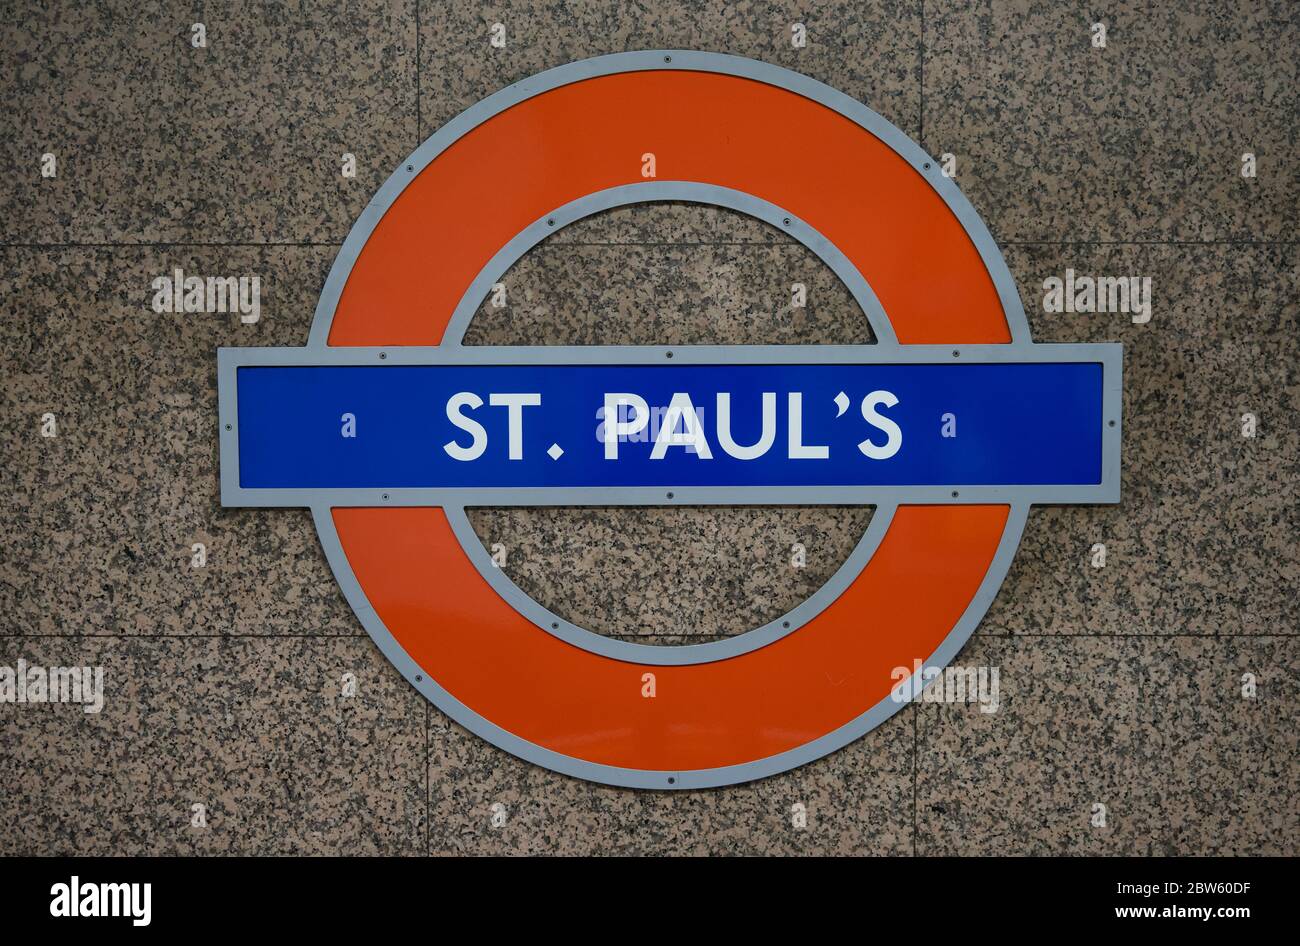 St Paul's London Underground Station sign on a stone marble wall. London Stock Photo